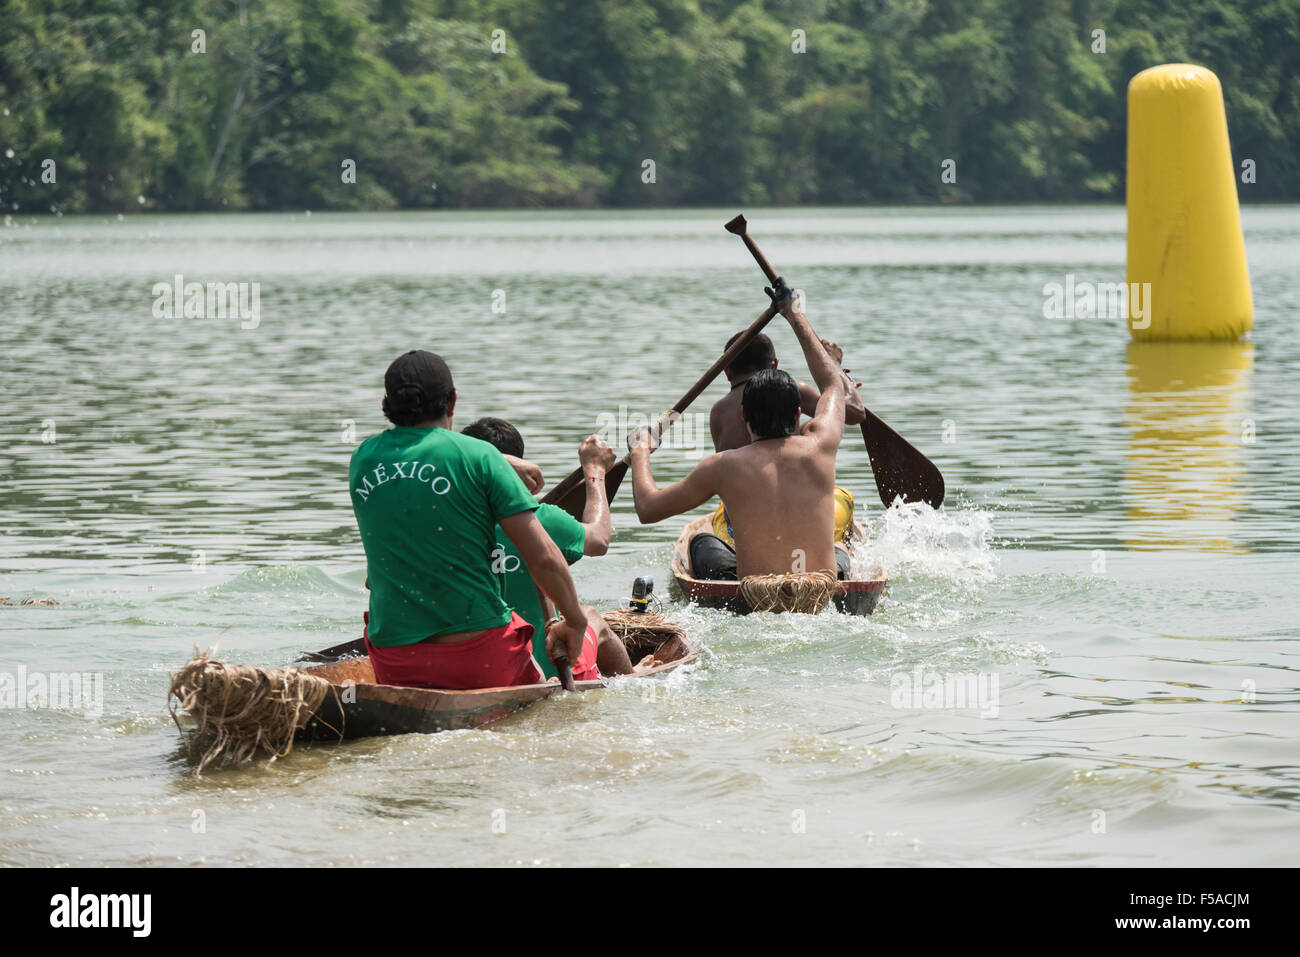 Palmas, Brazil. 30th October, 2015. The Mexican team close in on another canoe as they near the marker buoy during the canoeing event at the International Indigenous Games, in the city of Palmas, Tocantins State, Brazil. Credit:  Sue Cunningham Photographic/Alamy Live News Stock Photo